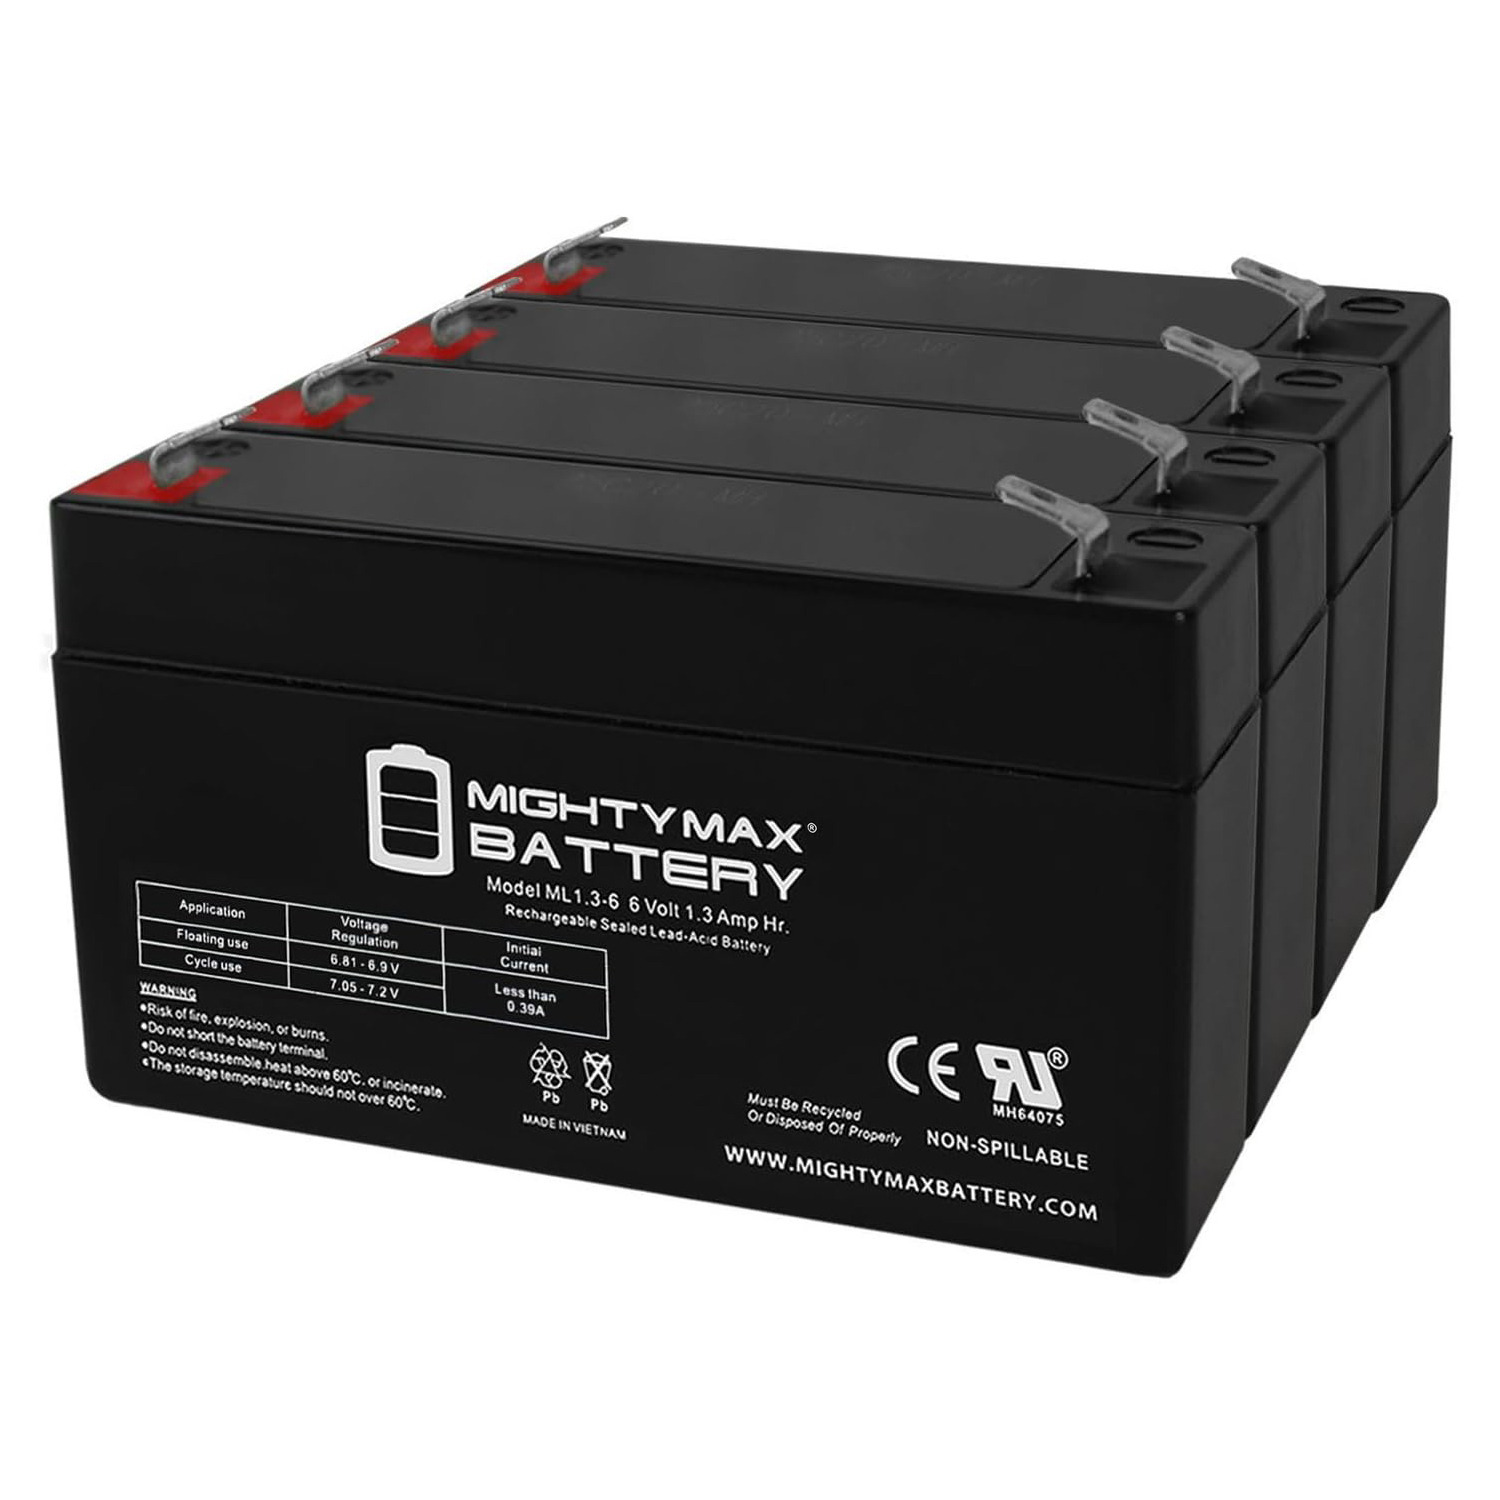 6V 1.3Ah SLA Replacement Battery for Exell D5731 - 4 Pack